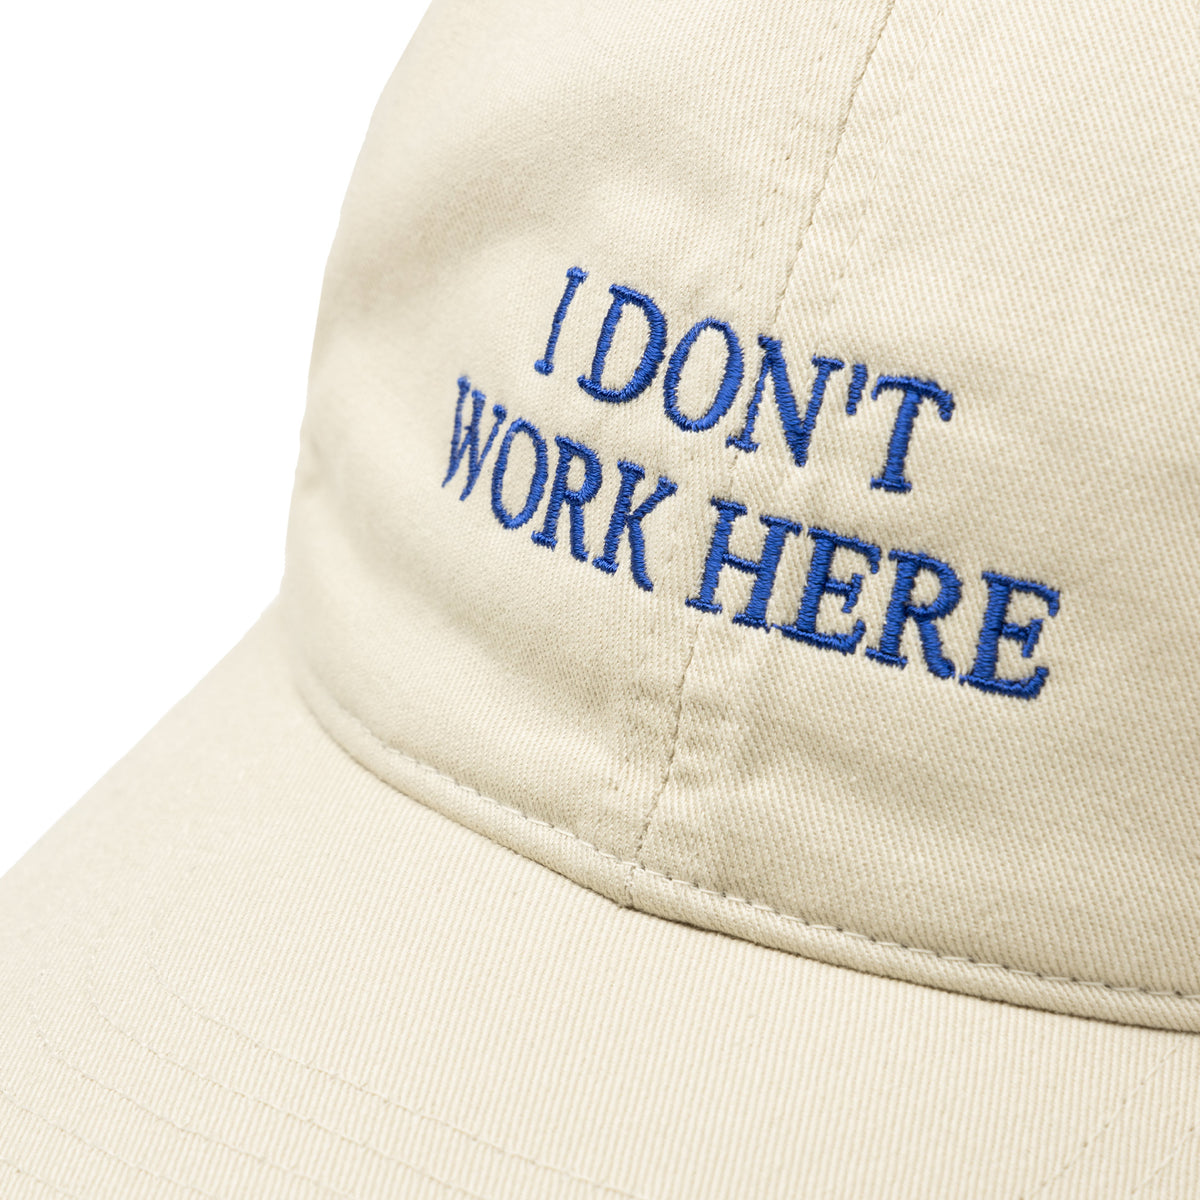 IDEA Sorry I Don't Work Here Cap » Buy online now!